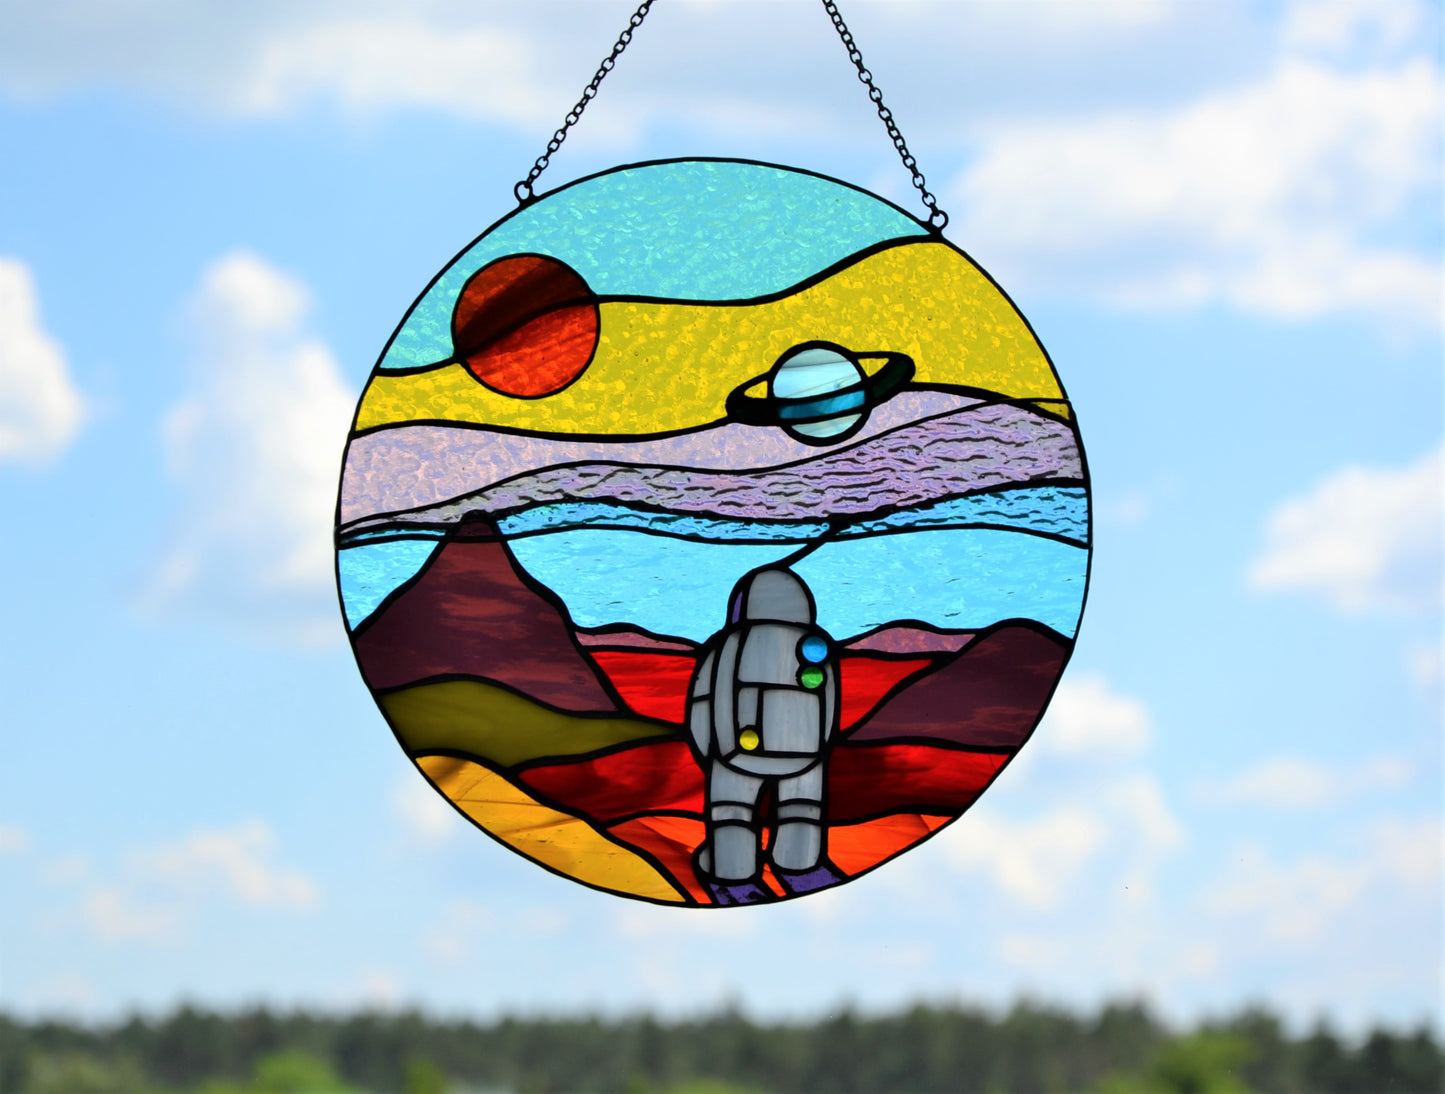 Stained glass suncatcher Space landscape Window hanging sun catcher Christmas gift Stained glass art Wall decor Mars mission Round panel